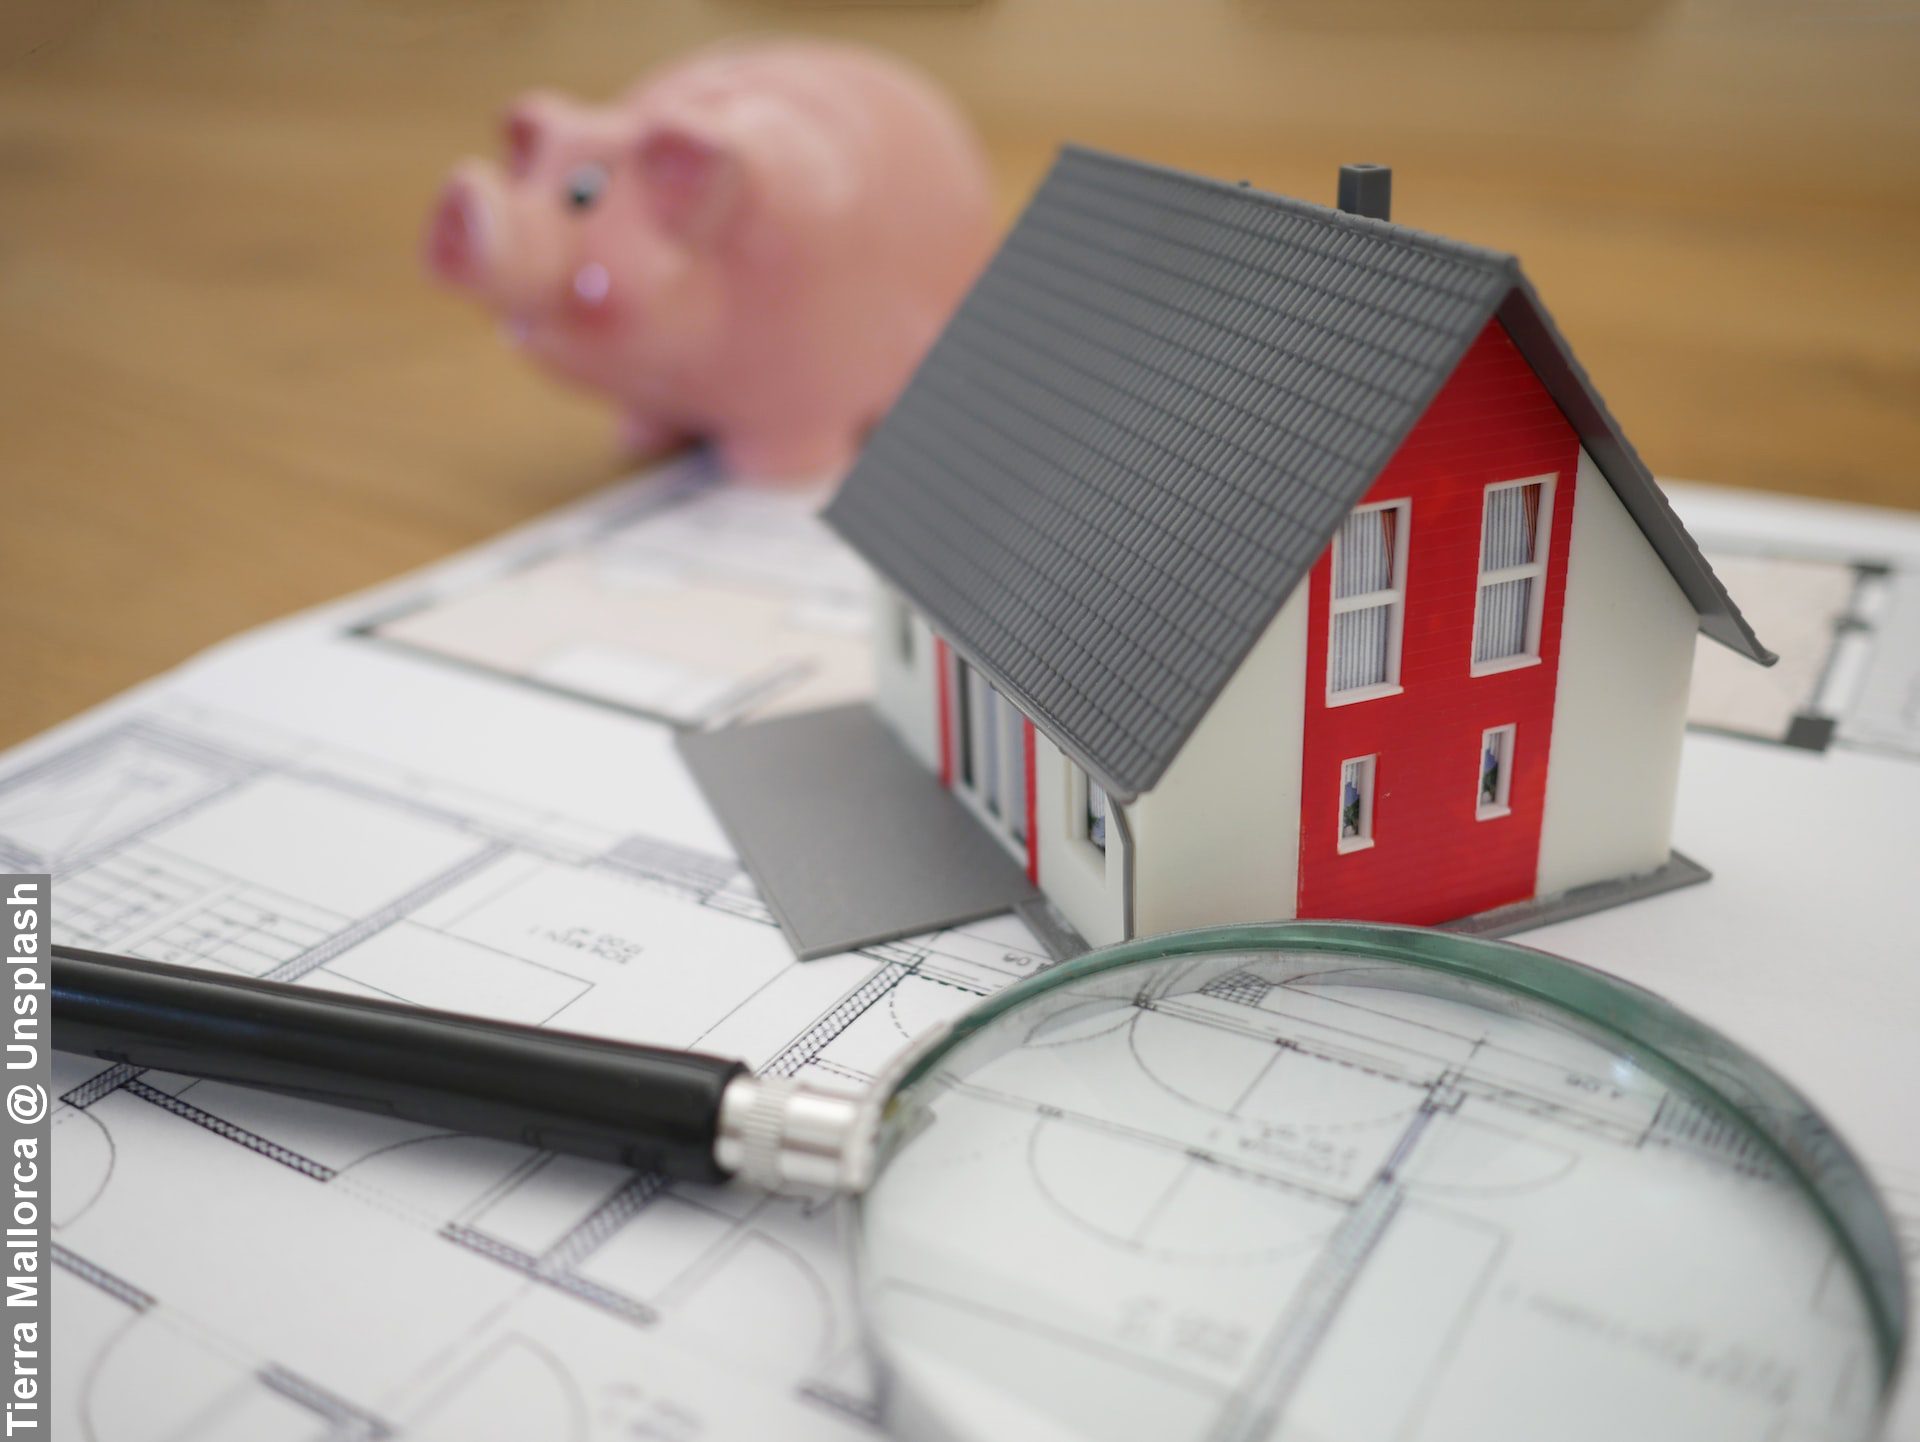 Financing balancing with magnifying glass, pink pig and model house